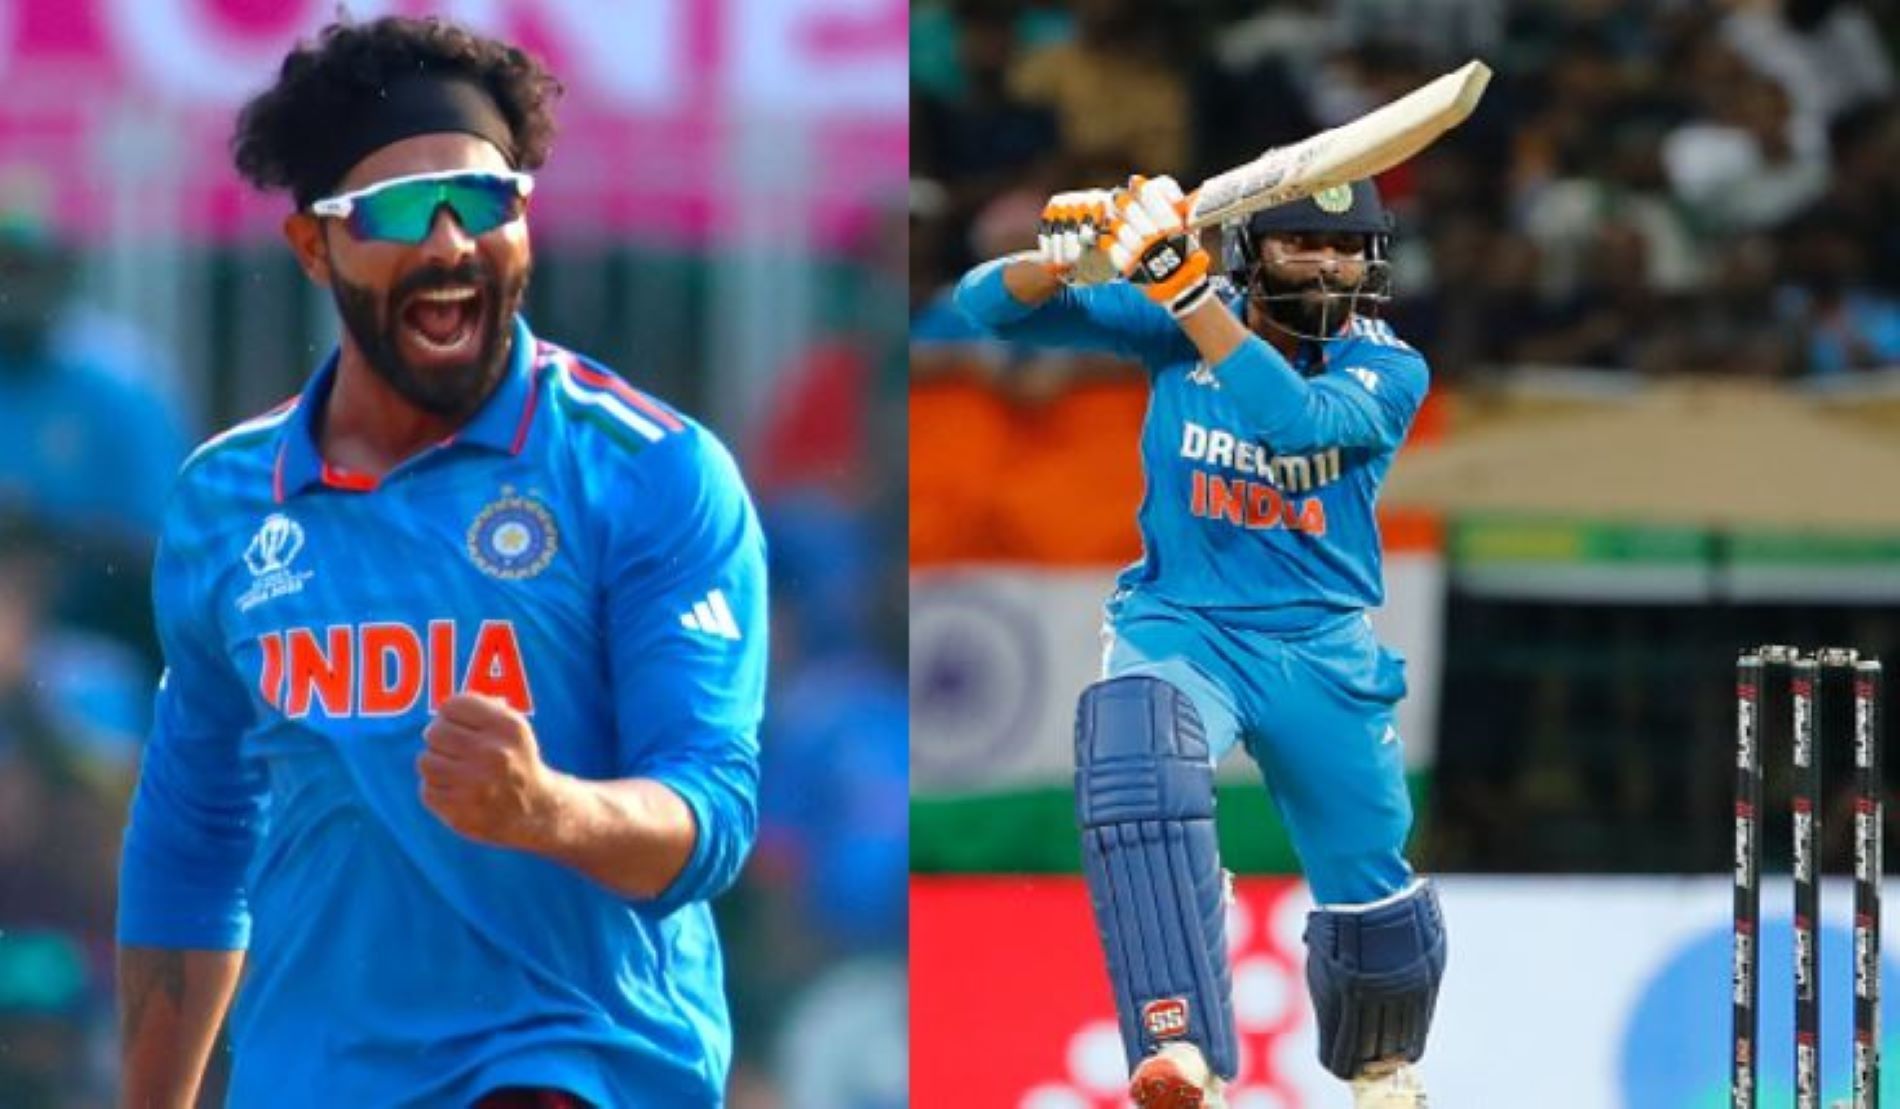 Jadeja has made valuable contributions with bat and ball for Team India.